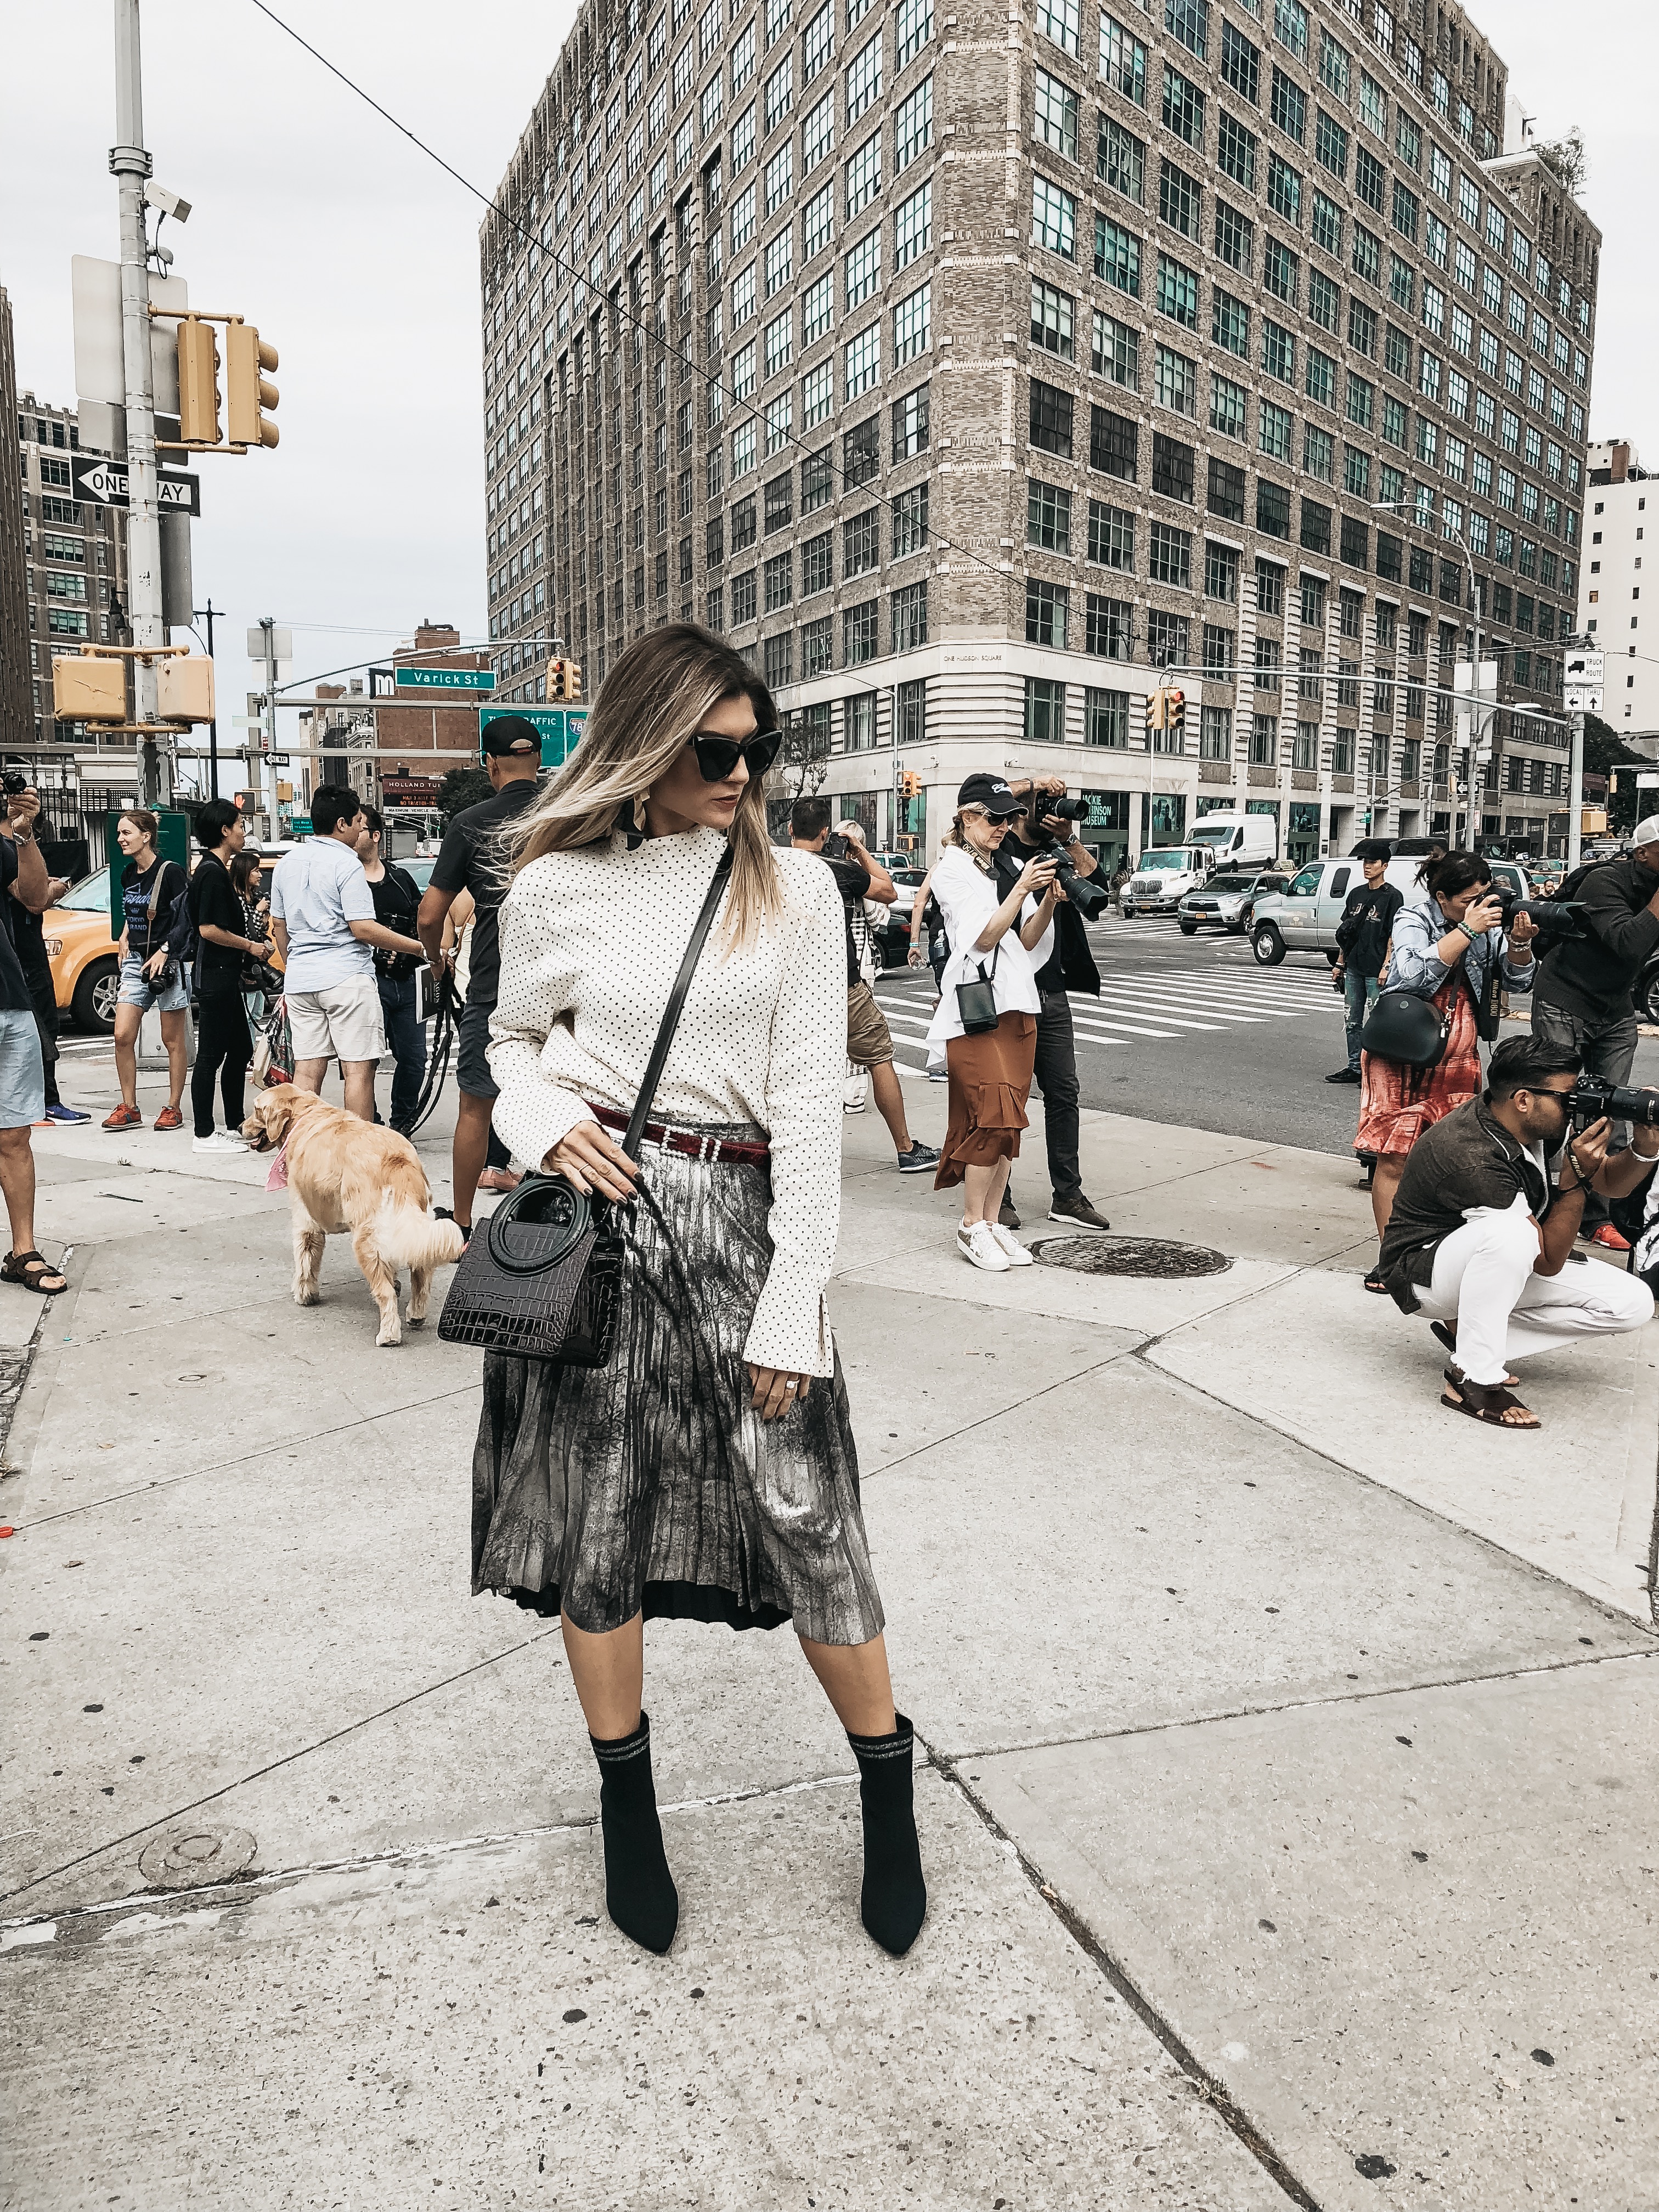 The Grey Edit-NYFW Daily Outfits-Mixed Prints